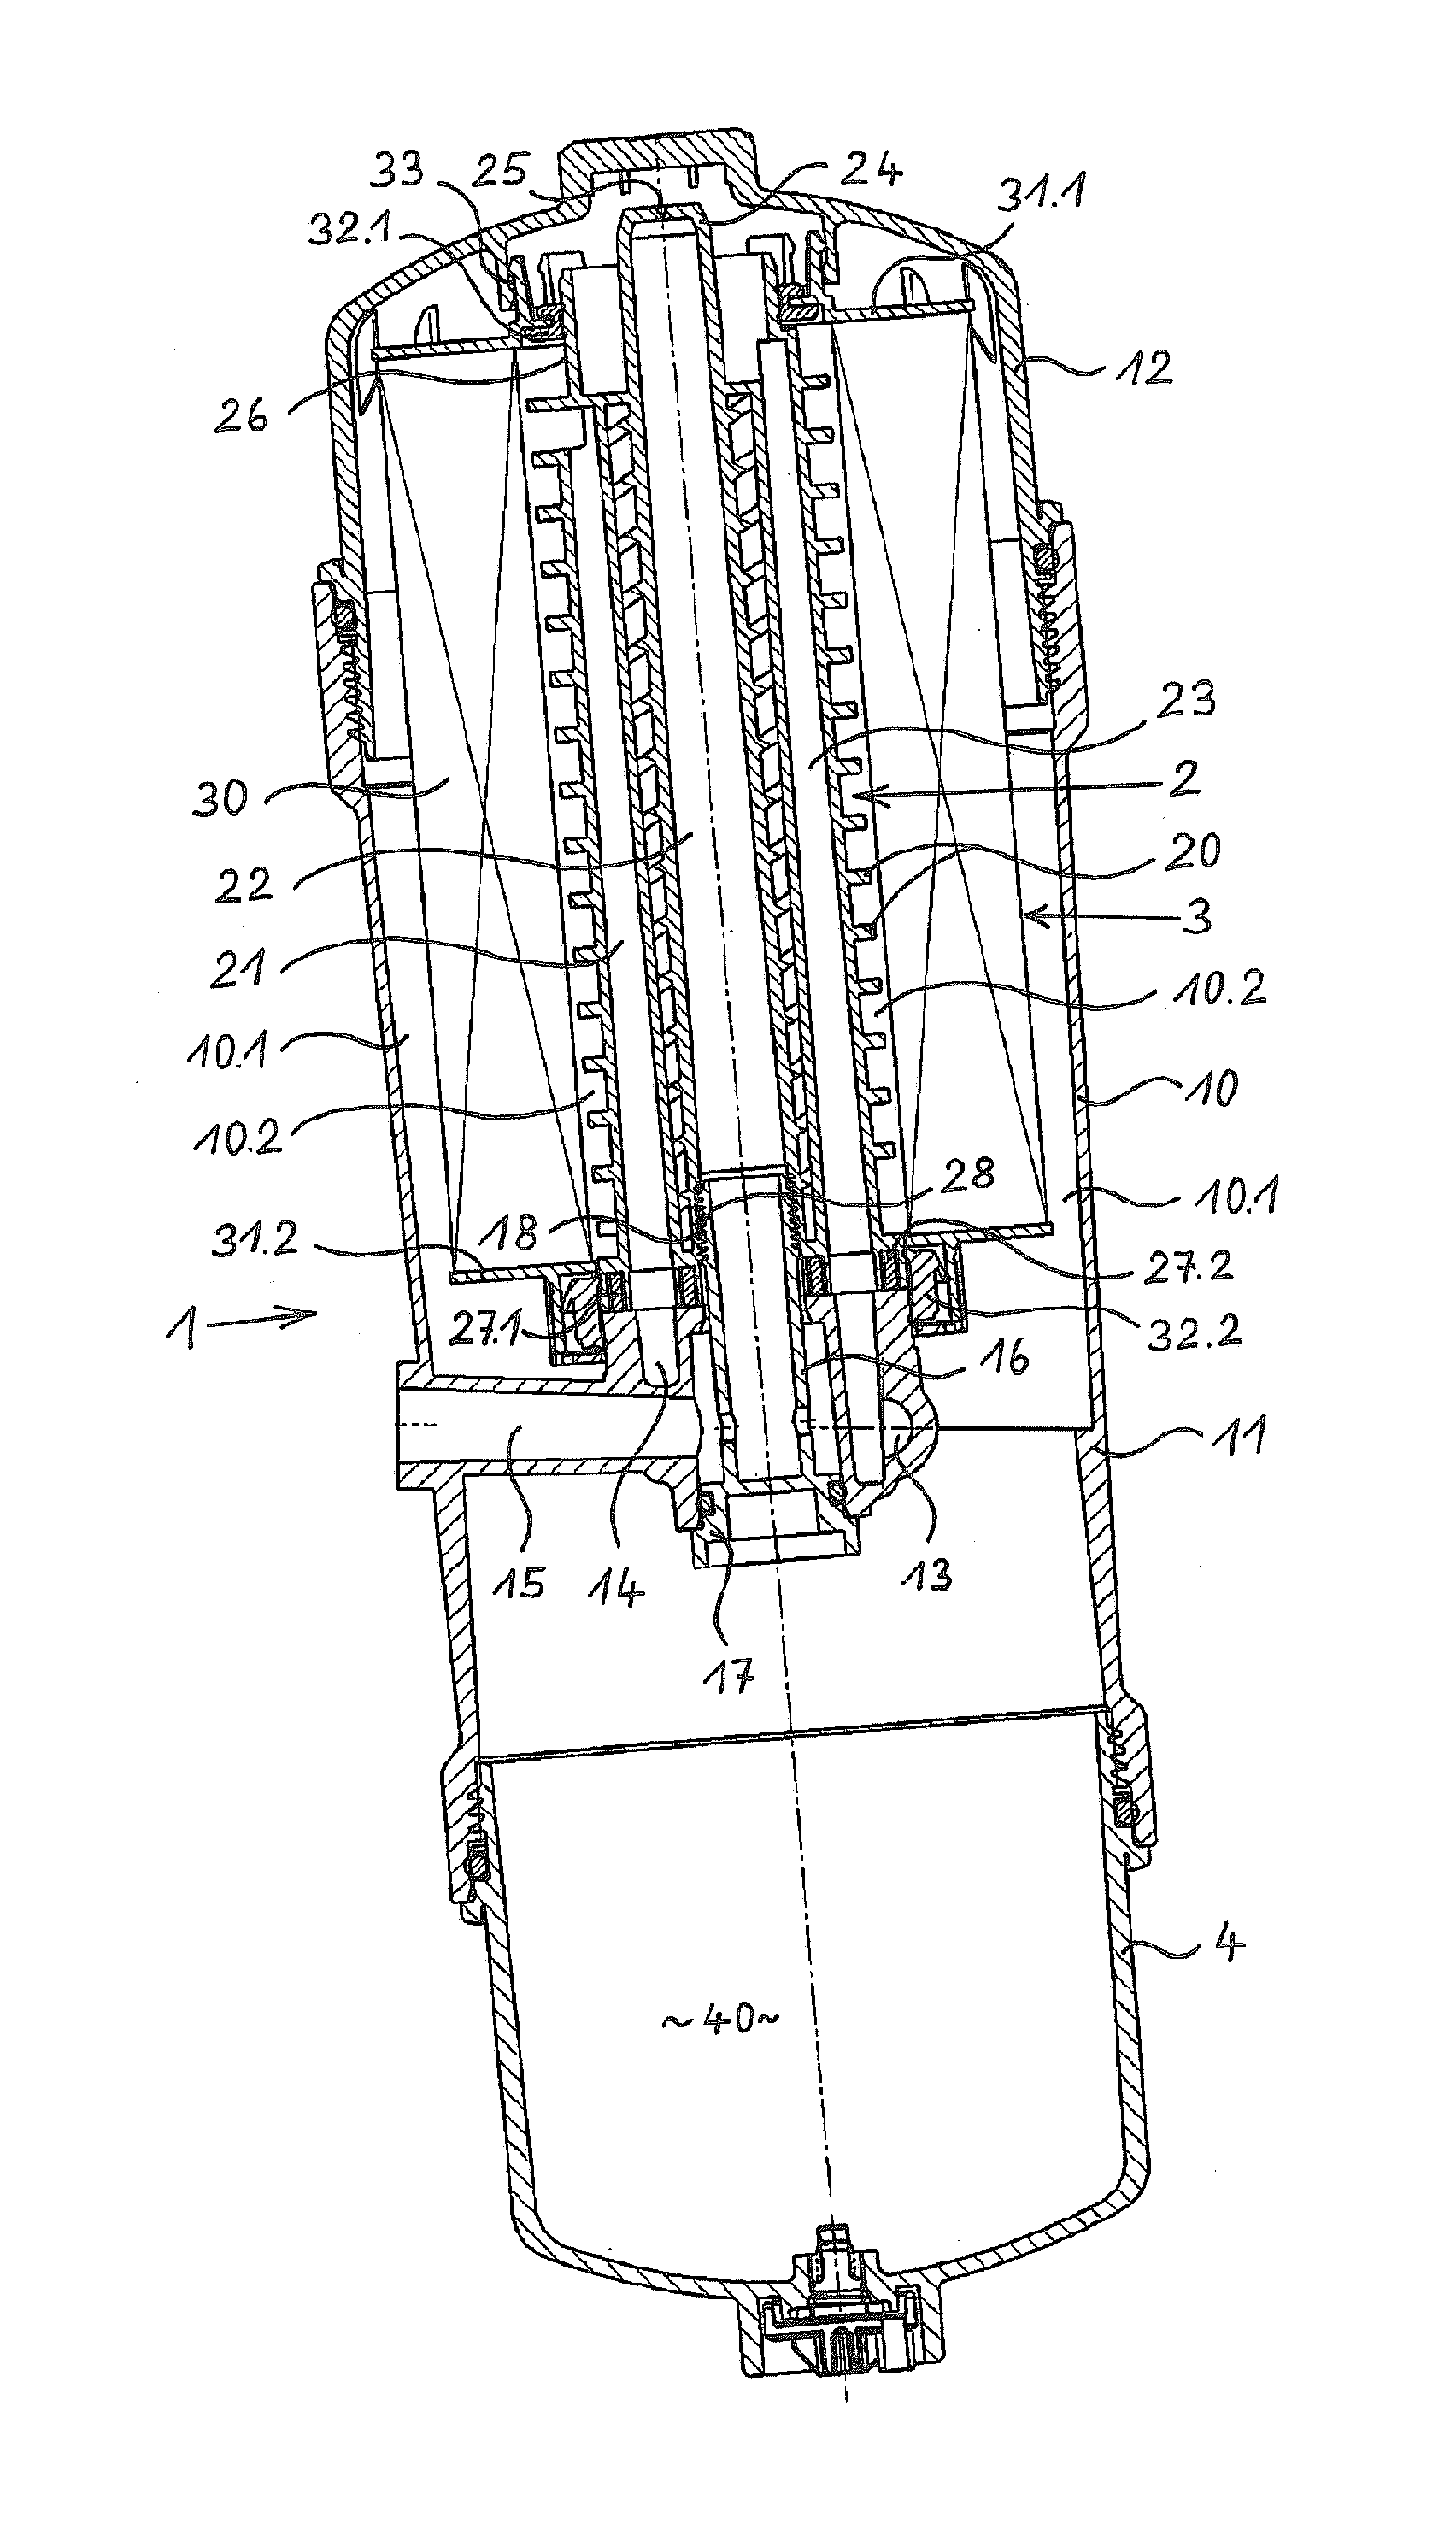 Fuel filter of an internal combustion engine